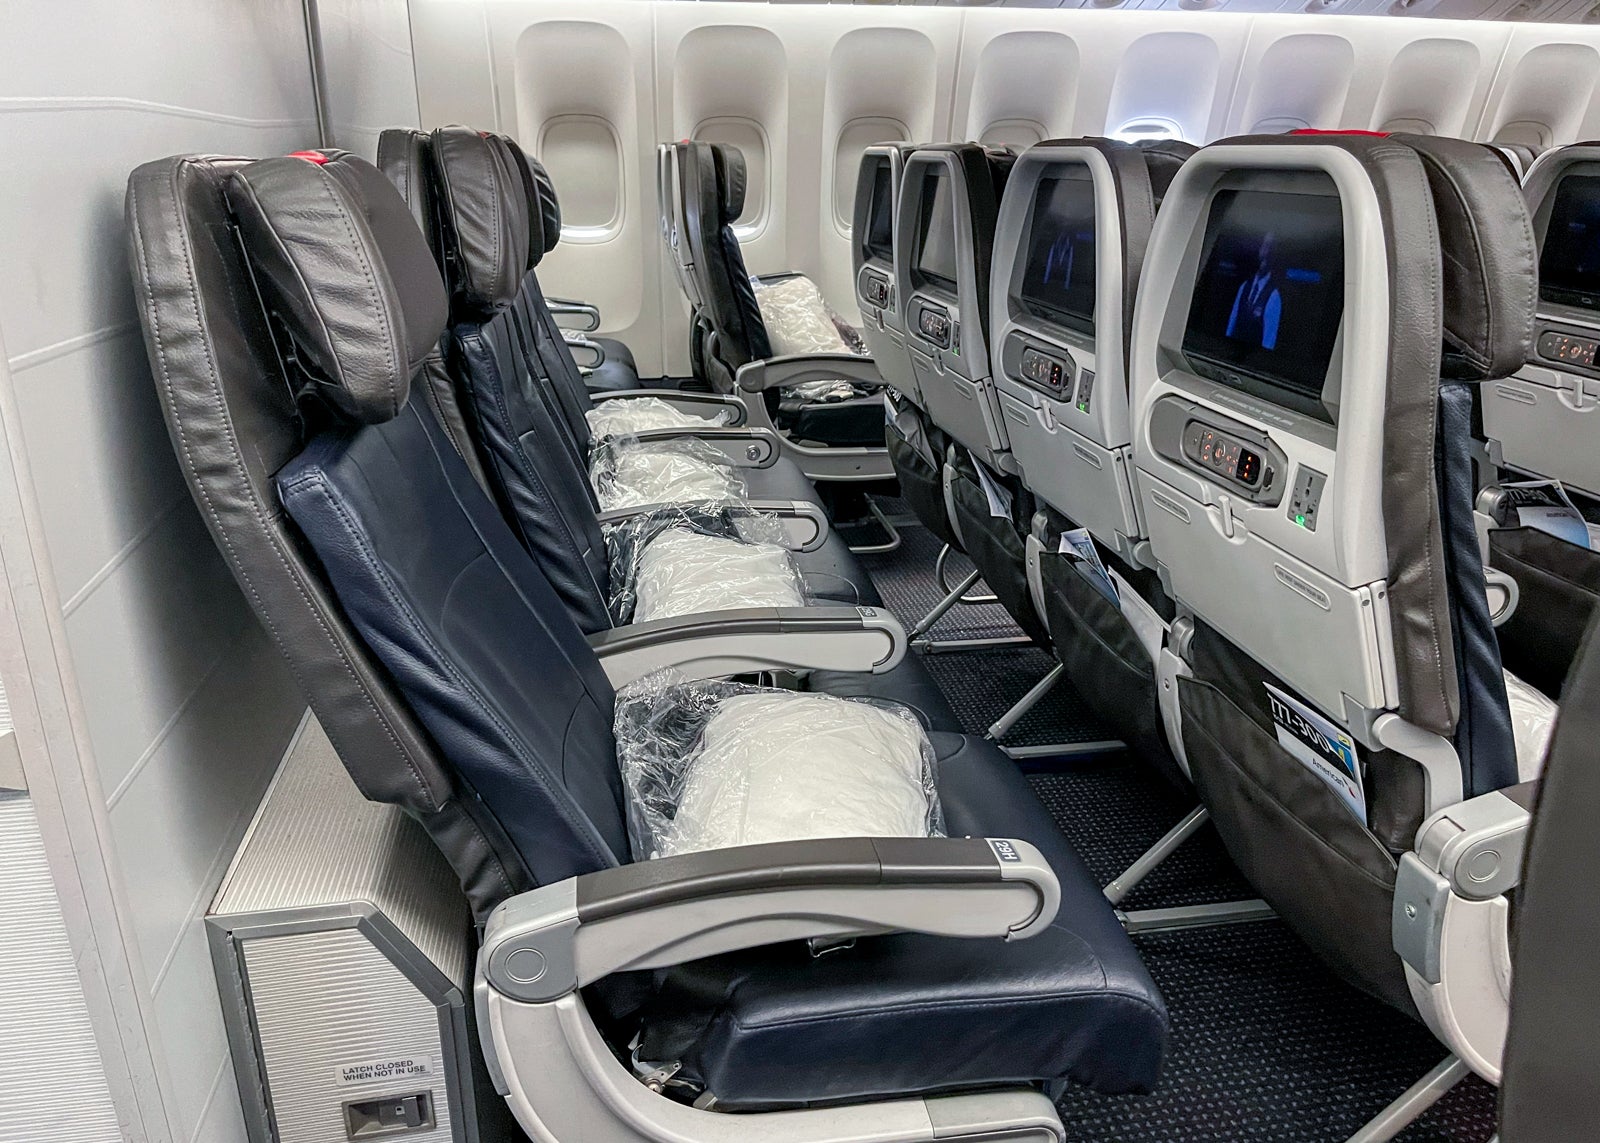 American Airlines Boeing 777-300ER economy